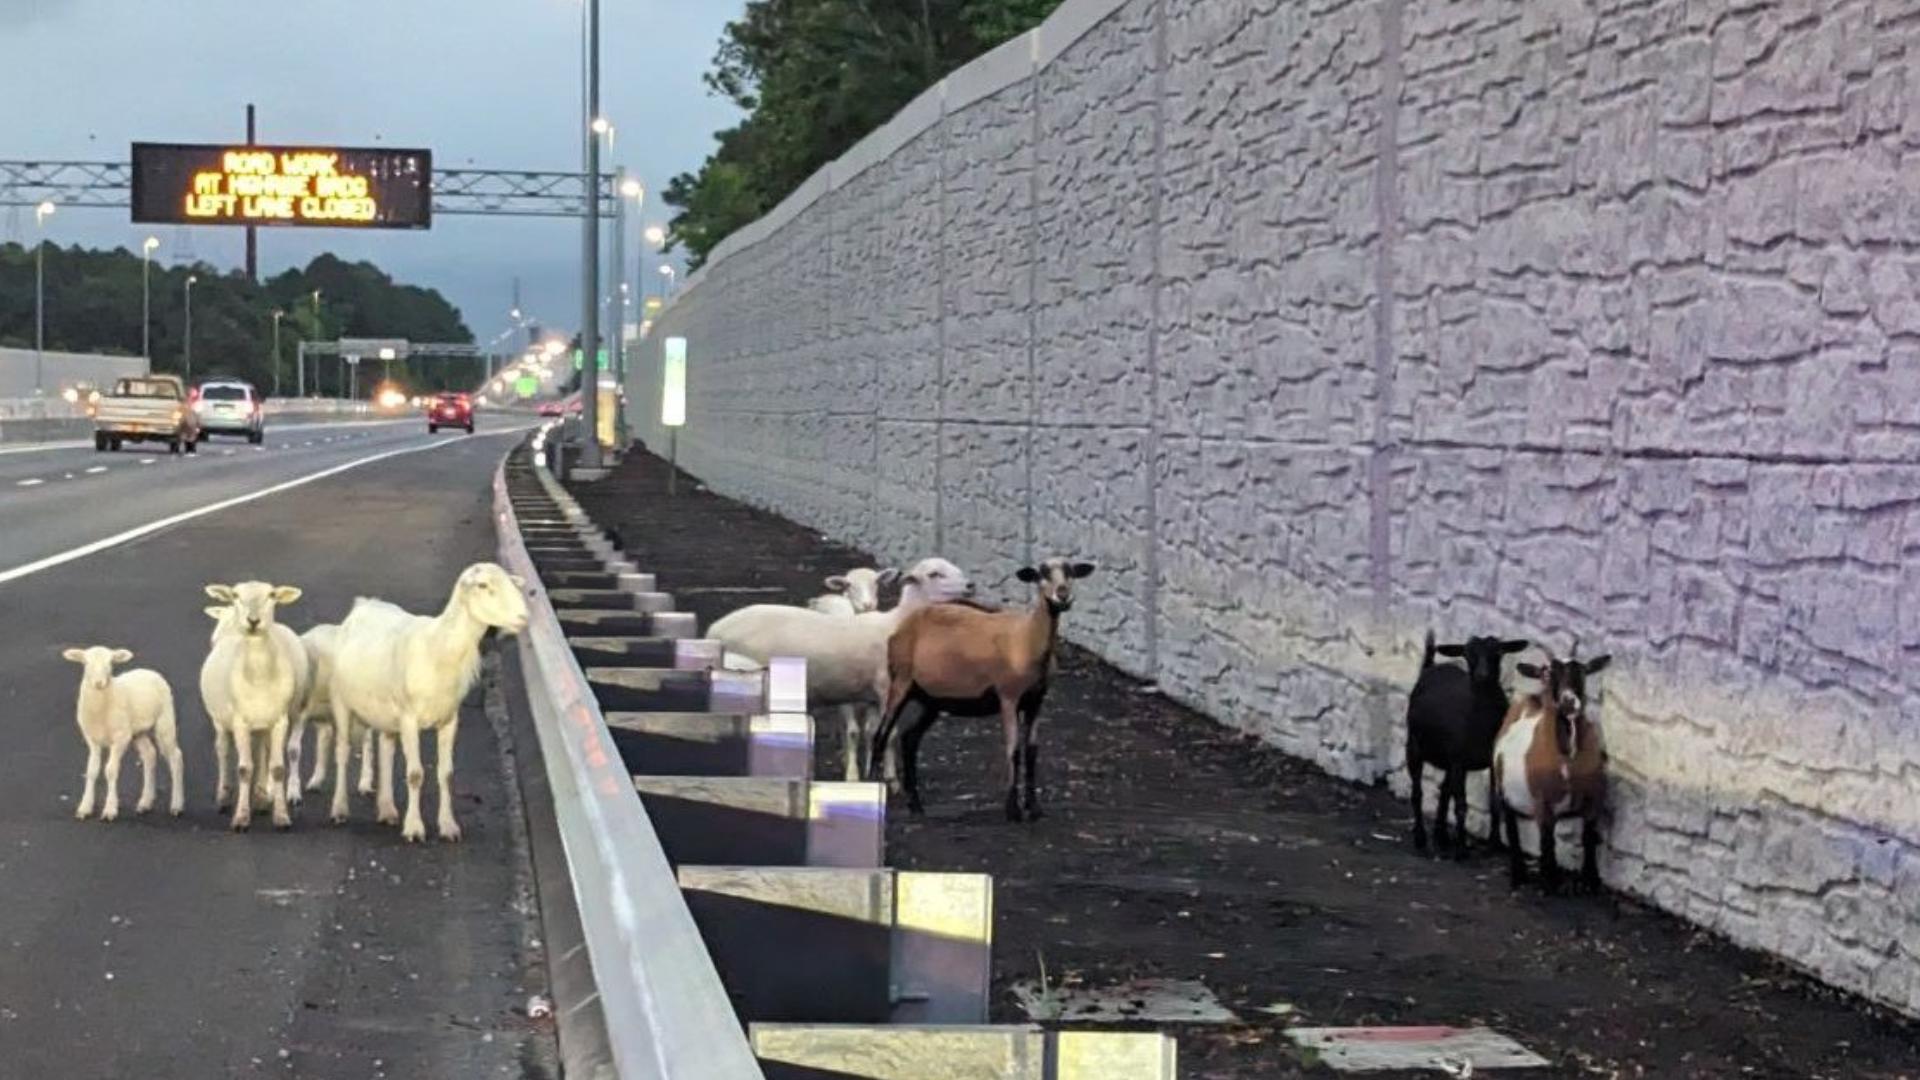 VSP officials wrote that Chesapeake Animal Control helped rectify the situation with the goats' safe return home.